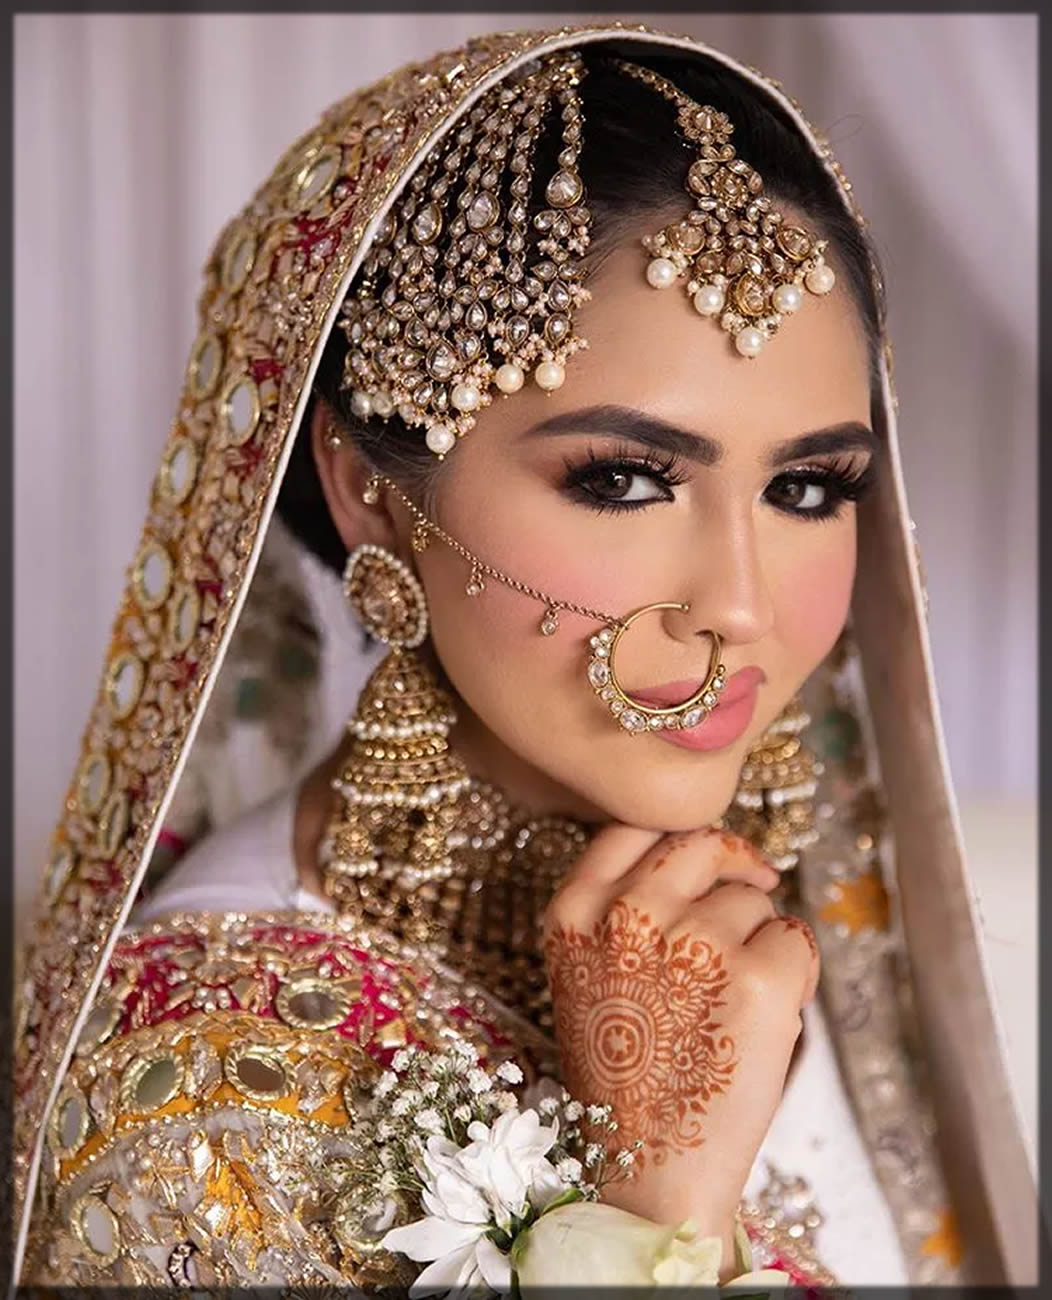 Indian Nose Nath Traditional Wedding Nose Ring Fashion Jewel Piercing With  Chain | eBay